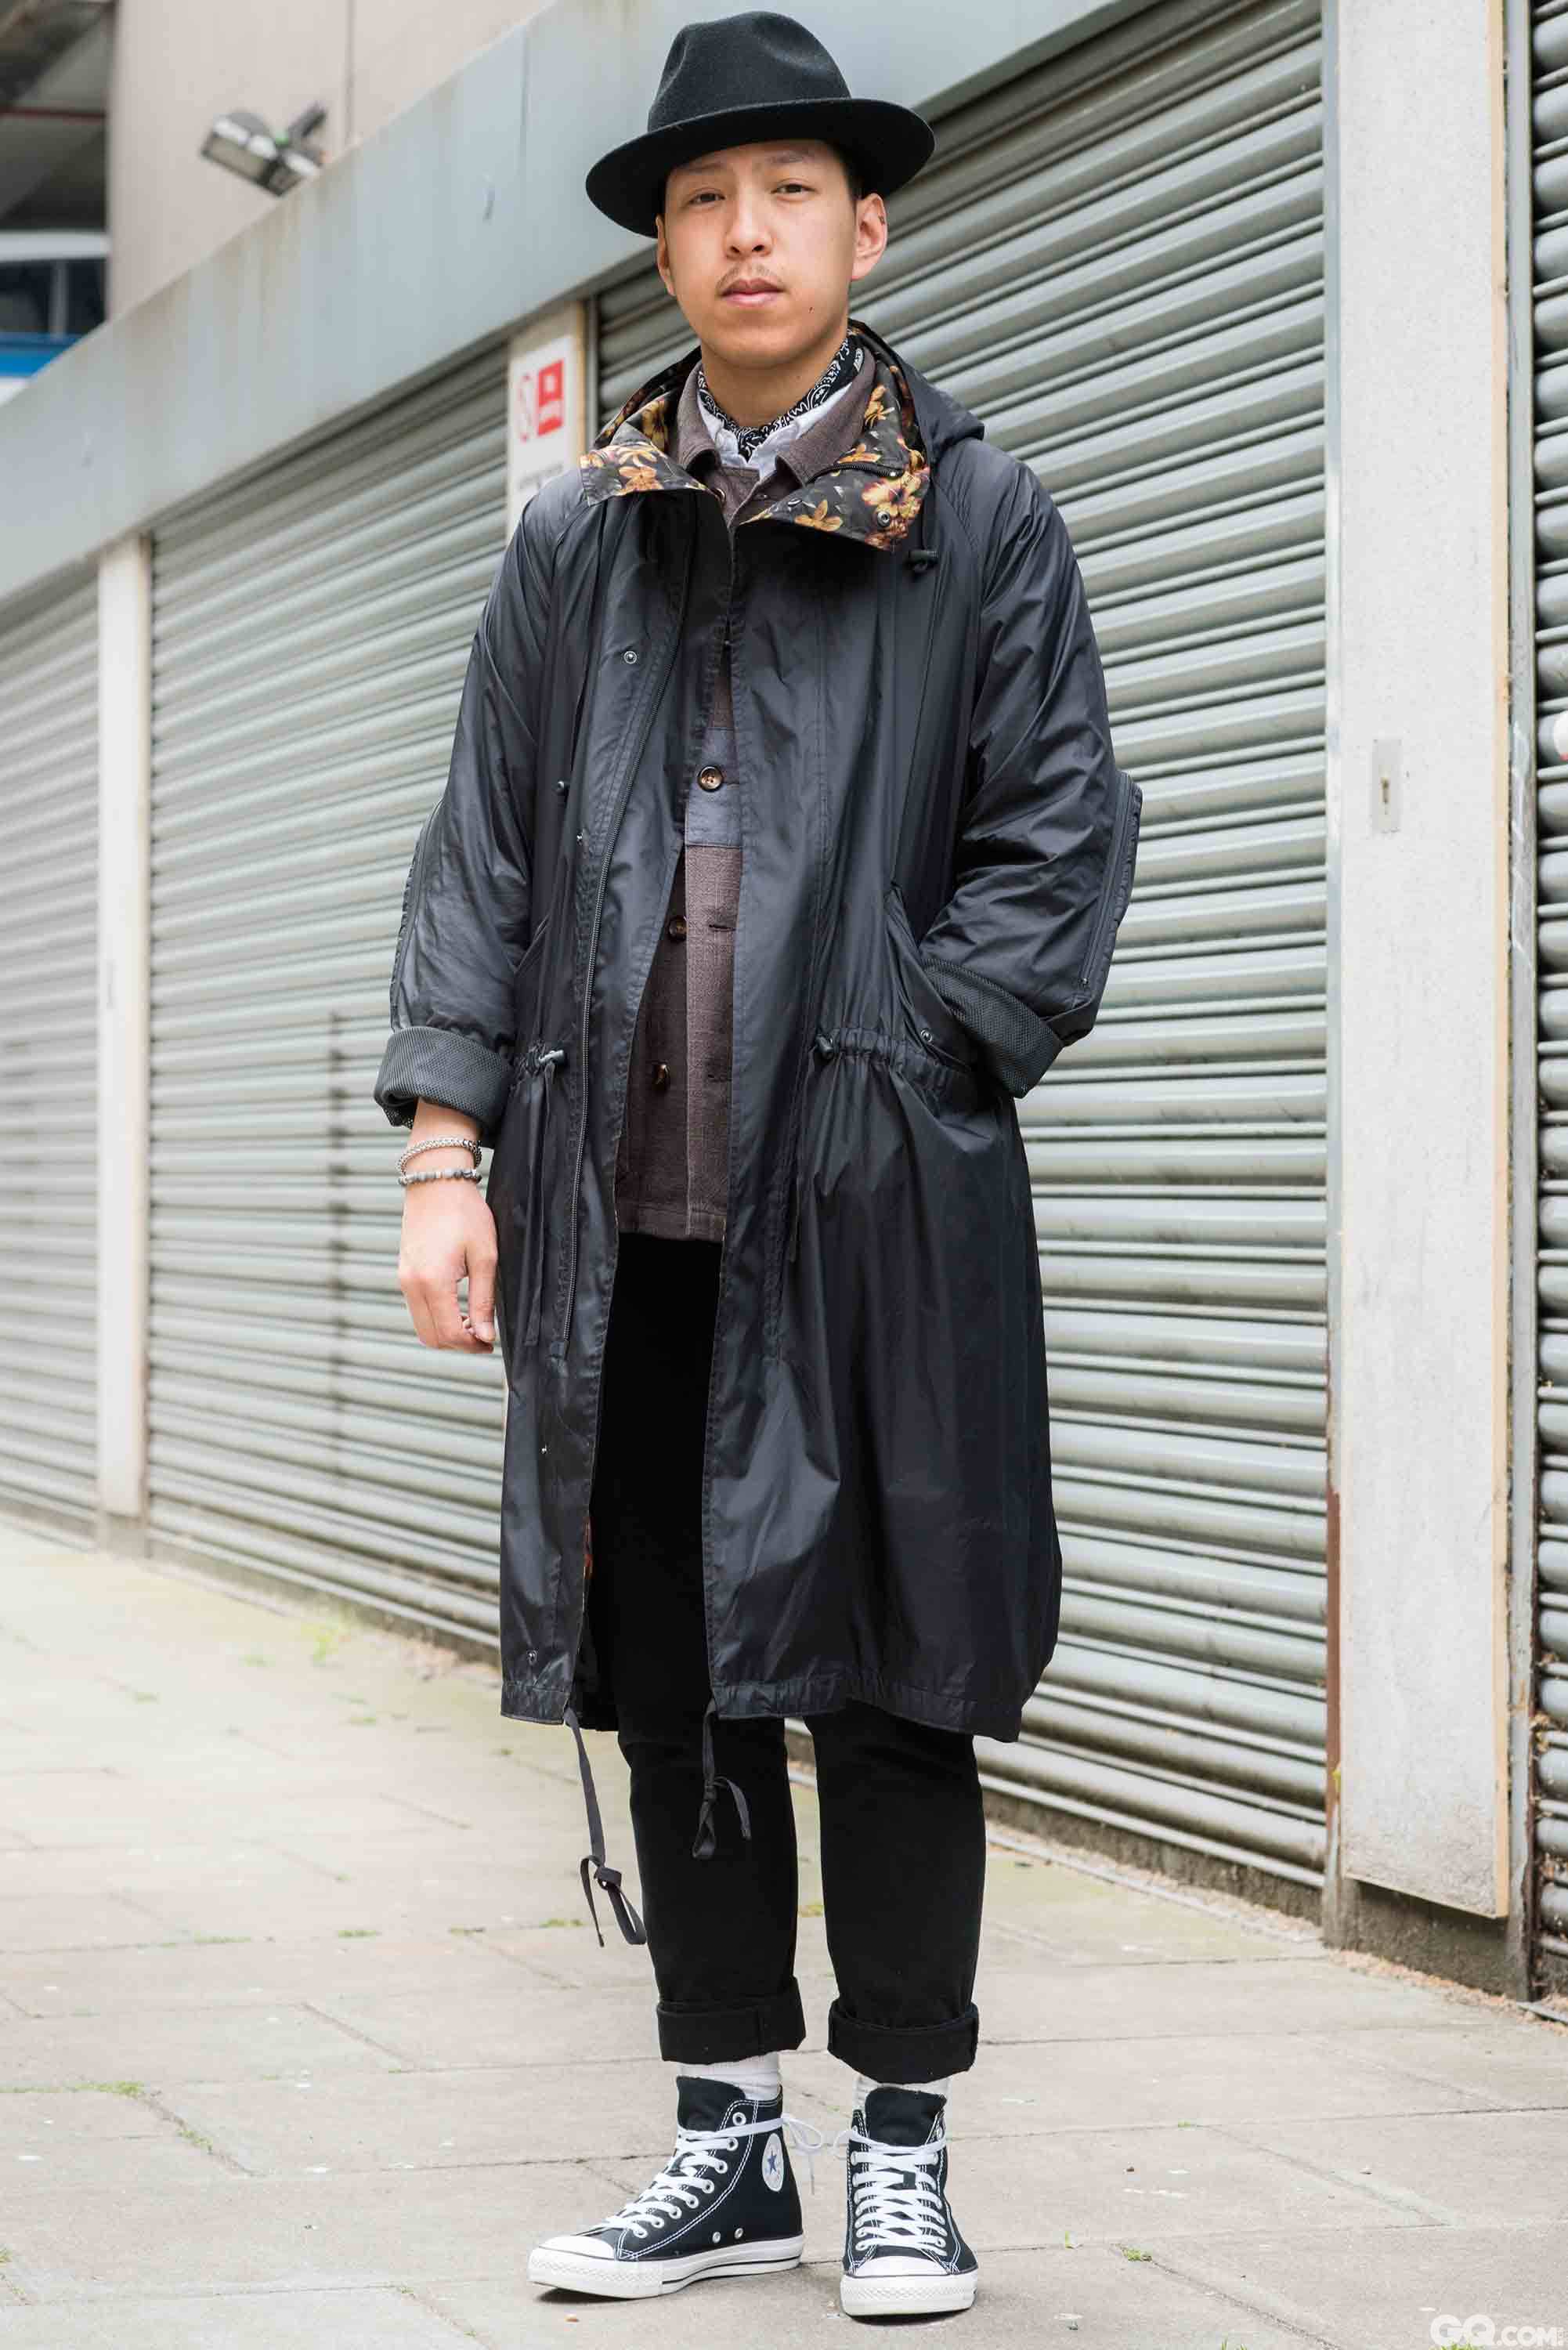 Paul
Hat: Vintage
Raincoat: Y3
Jacket: Creep
Shirt: Top Man
Trousers: Top Man
Shoes: Converse
Jewelry: Vitaly and some vintage pieces

Inspiration: I really wanted to wear this raincoat so I built my look entire around it. 我很想穿这件雨衣，所以我的搭配都是围绕它的。